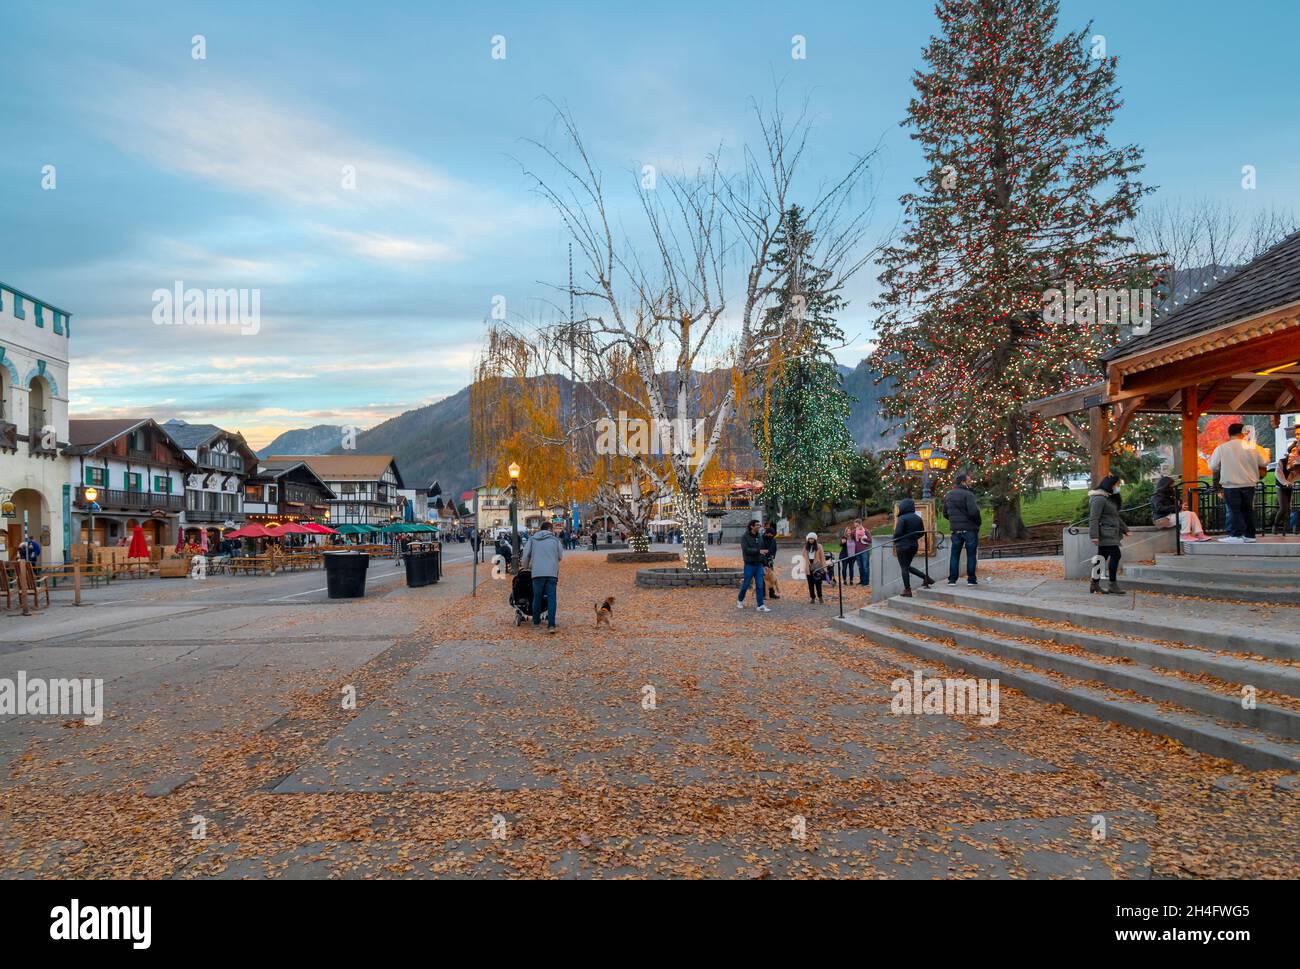 Tourists enjoy an early evening on the main street of the Bavarian Themed village of Leavenworth in the Cascade mountains of Washington. Stock Photo